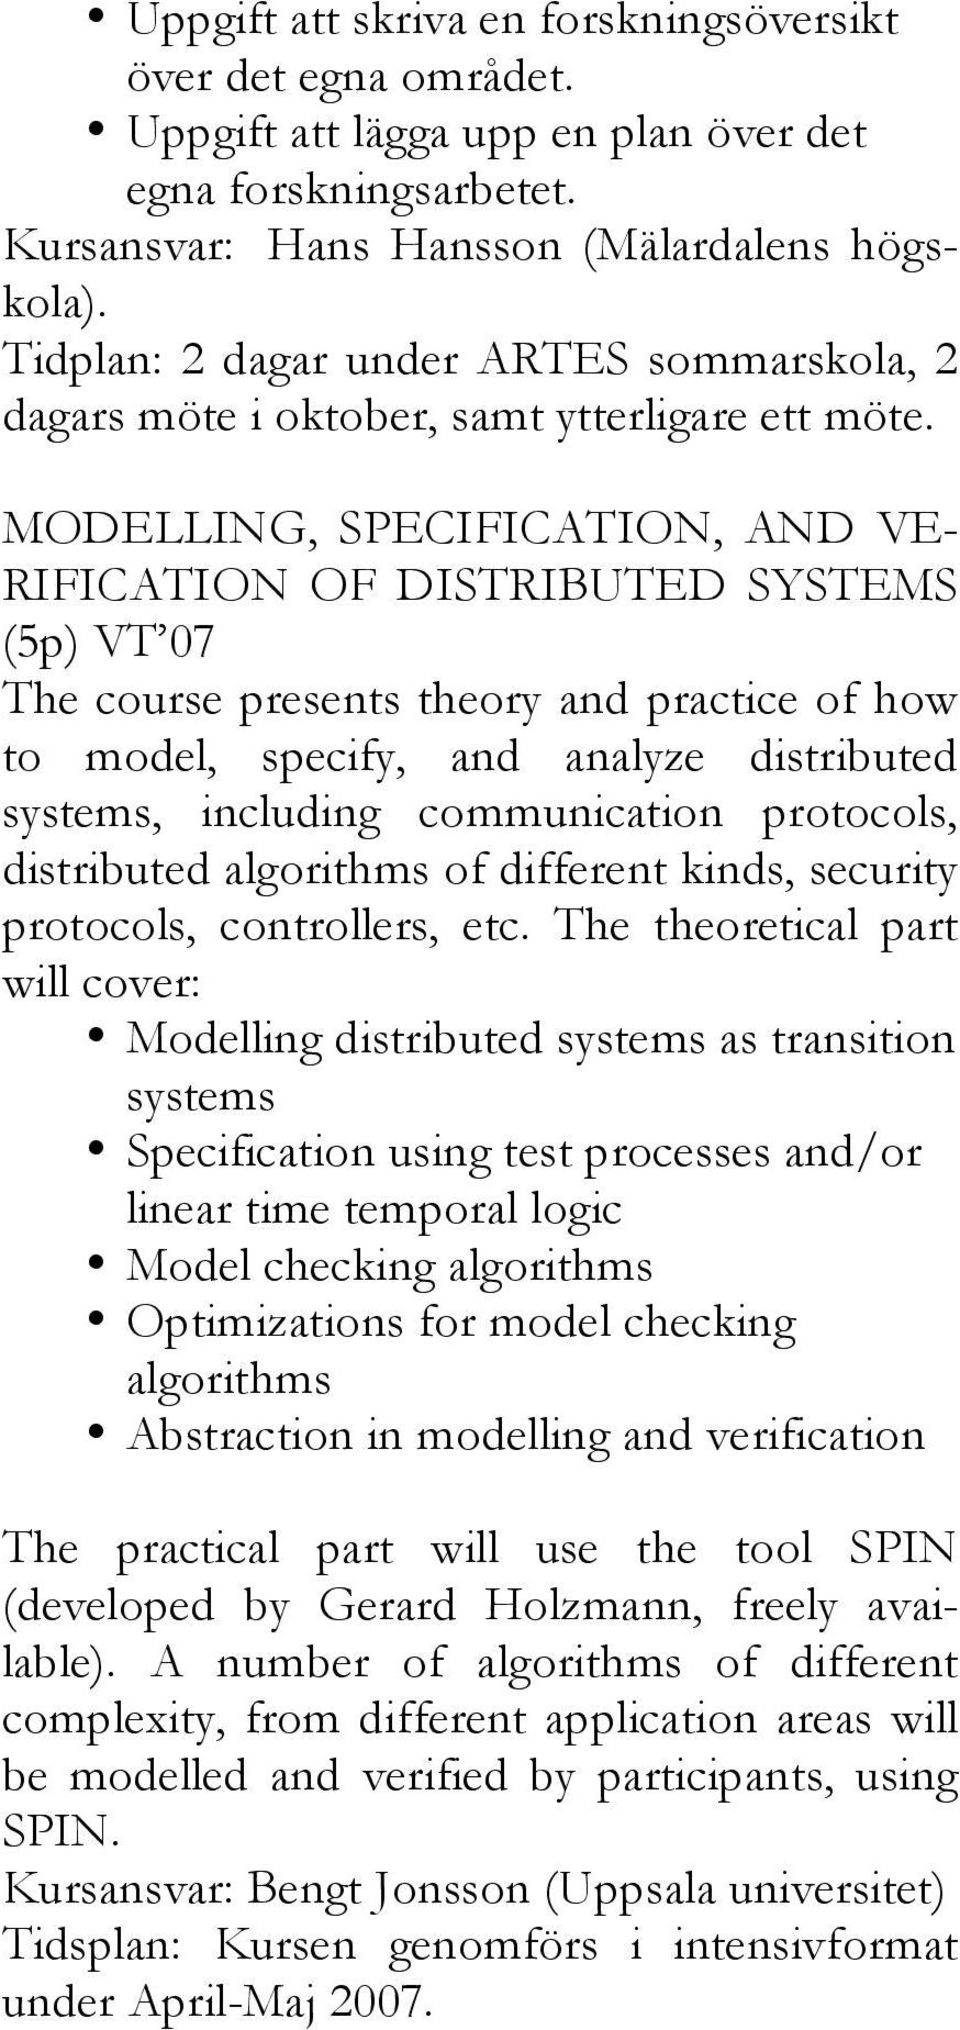 MODELLING, SPECIFICATION, AND VE- RIFICATION OF DISTRIBUTED SYSTEMS (5p) VT 07 The course presents theory and practice of how to model, specify, and analyze distributed systems, including